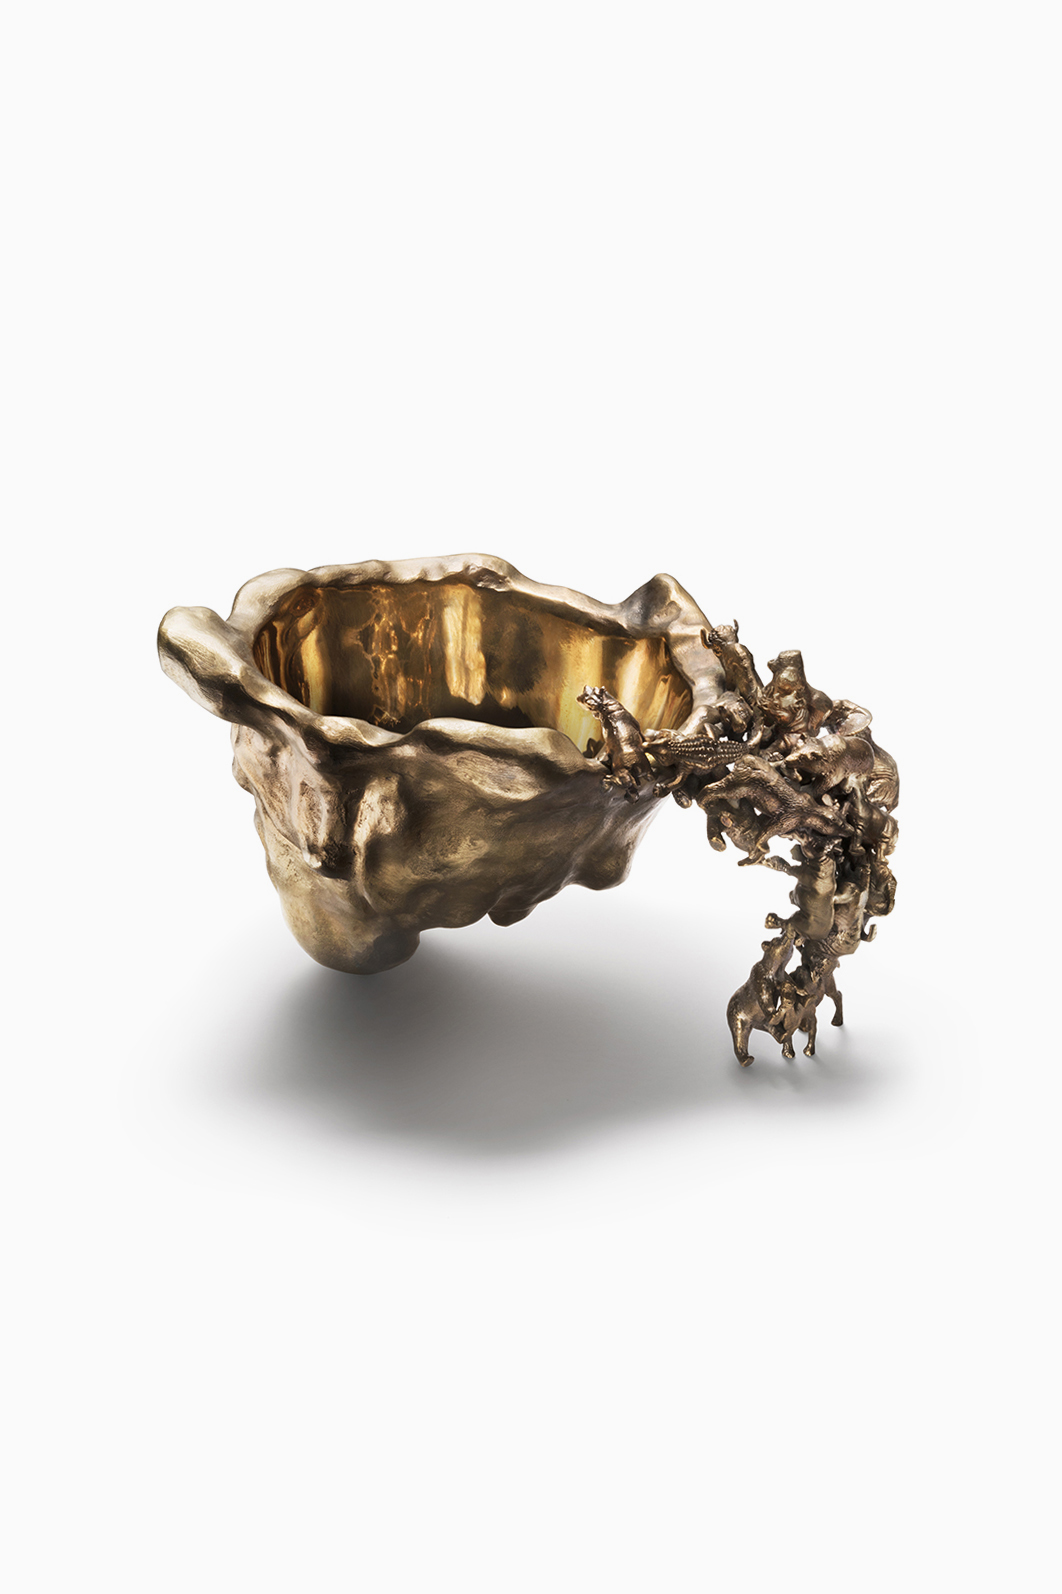 golden bowl with animals designed by campana brothers